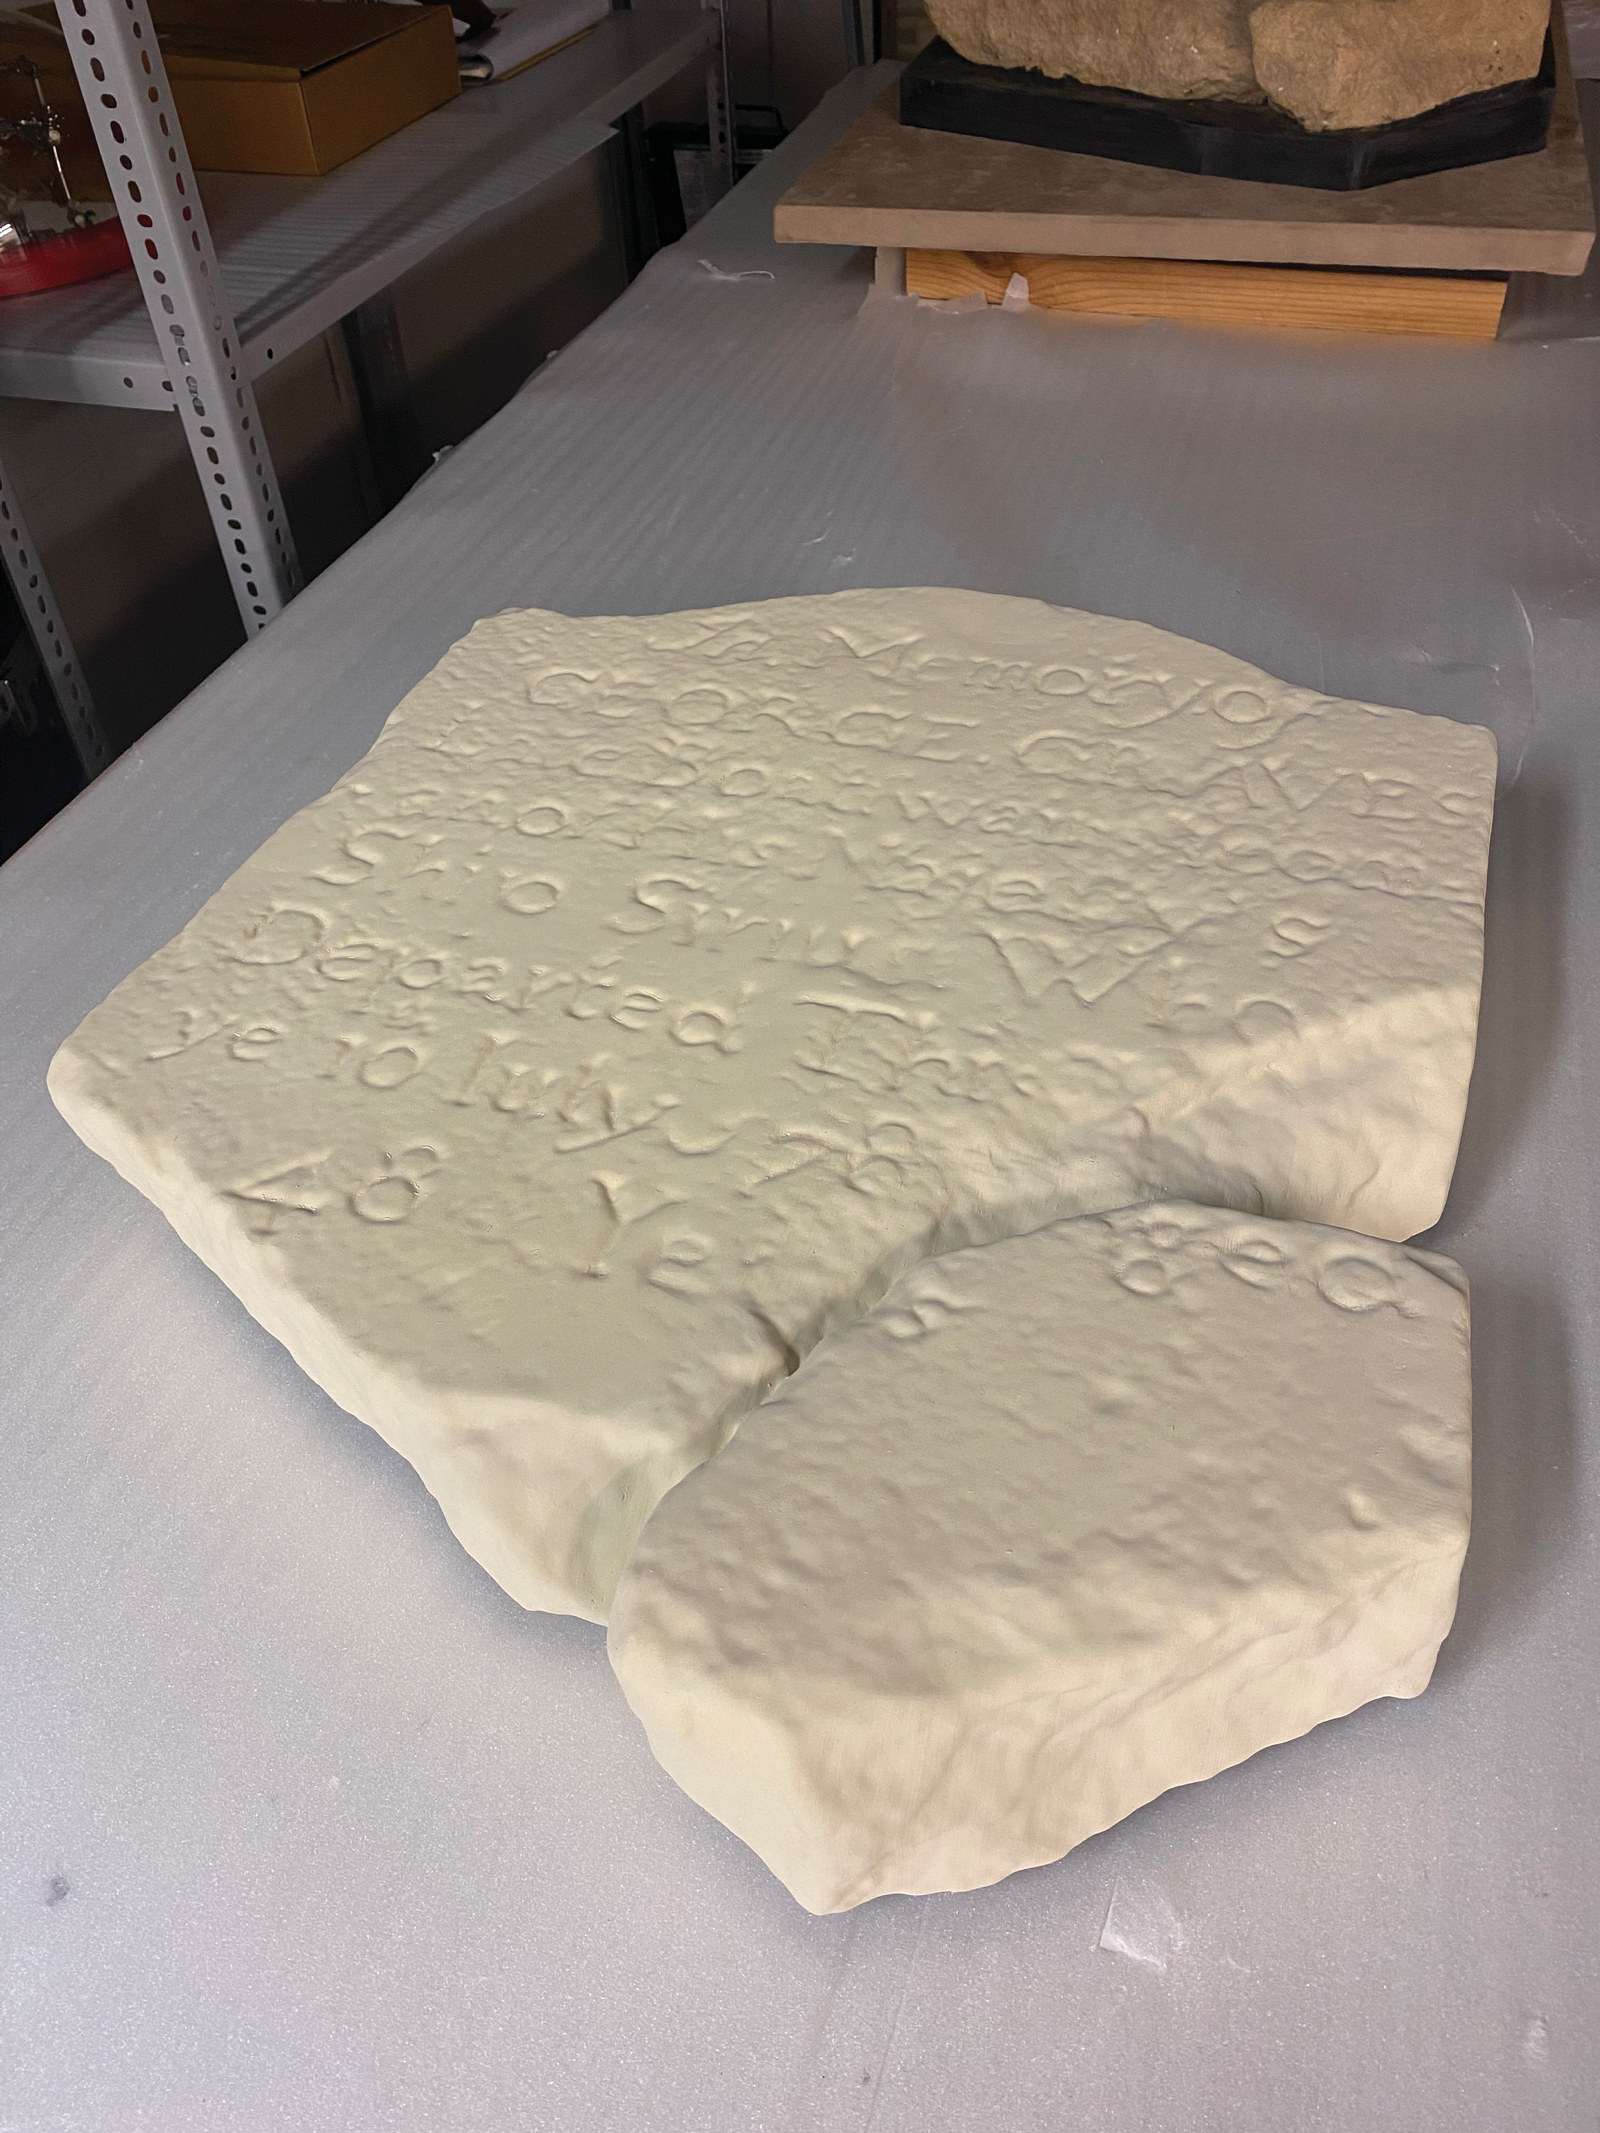 3D print of sandstone headstone lying flat on a metal table